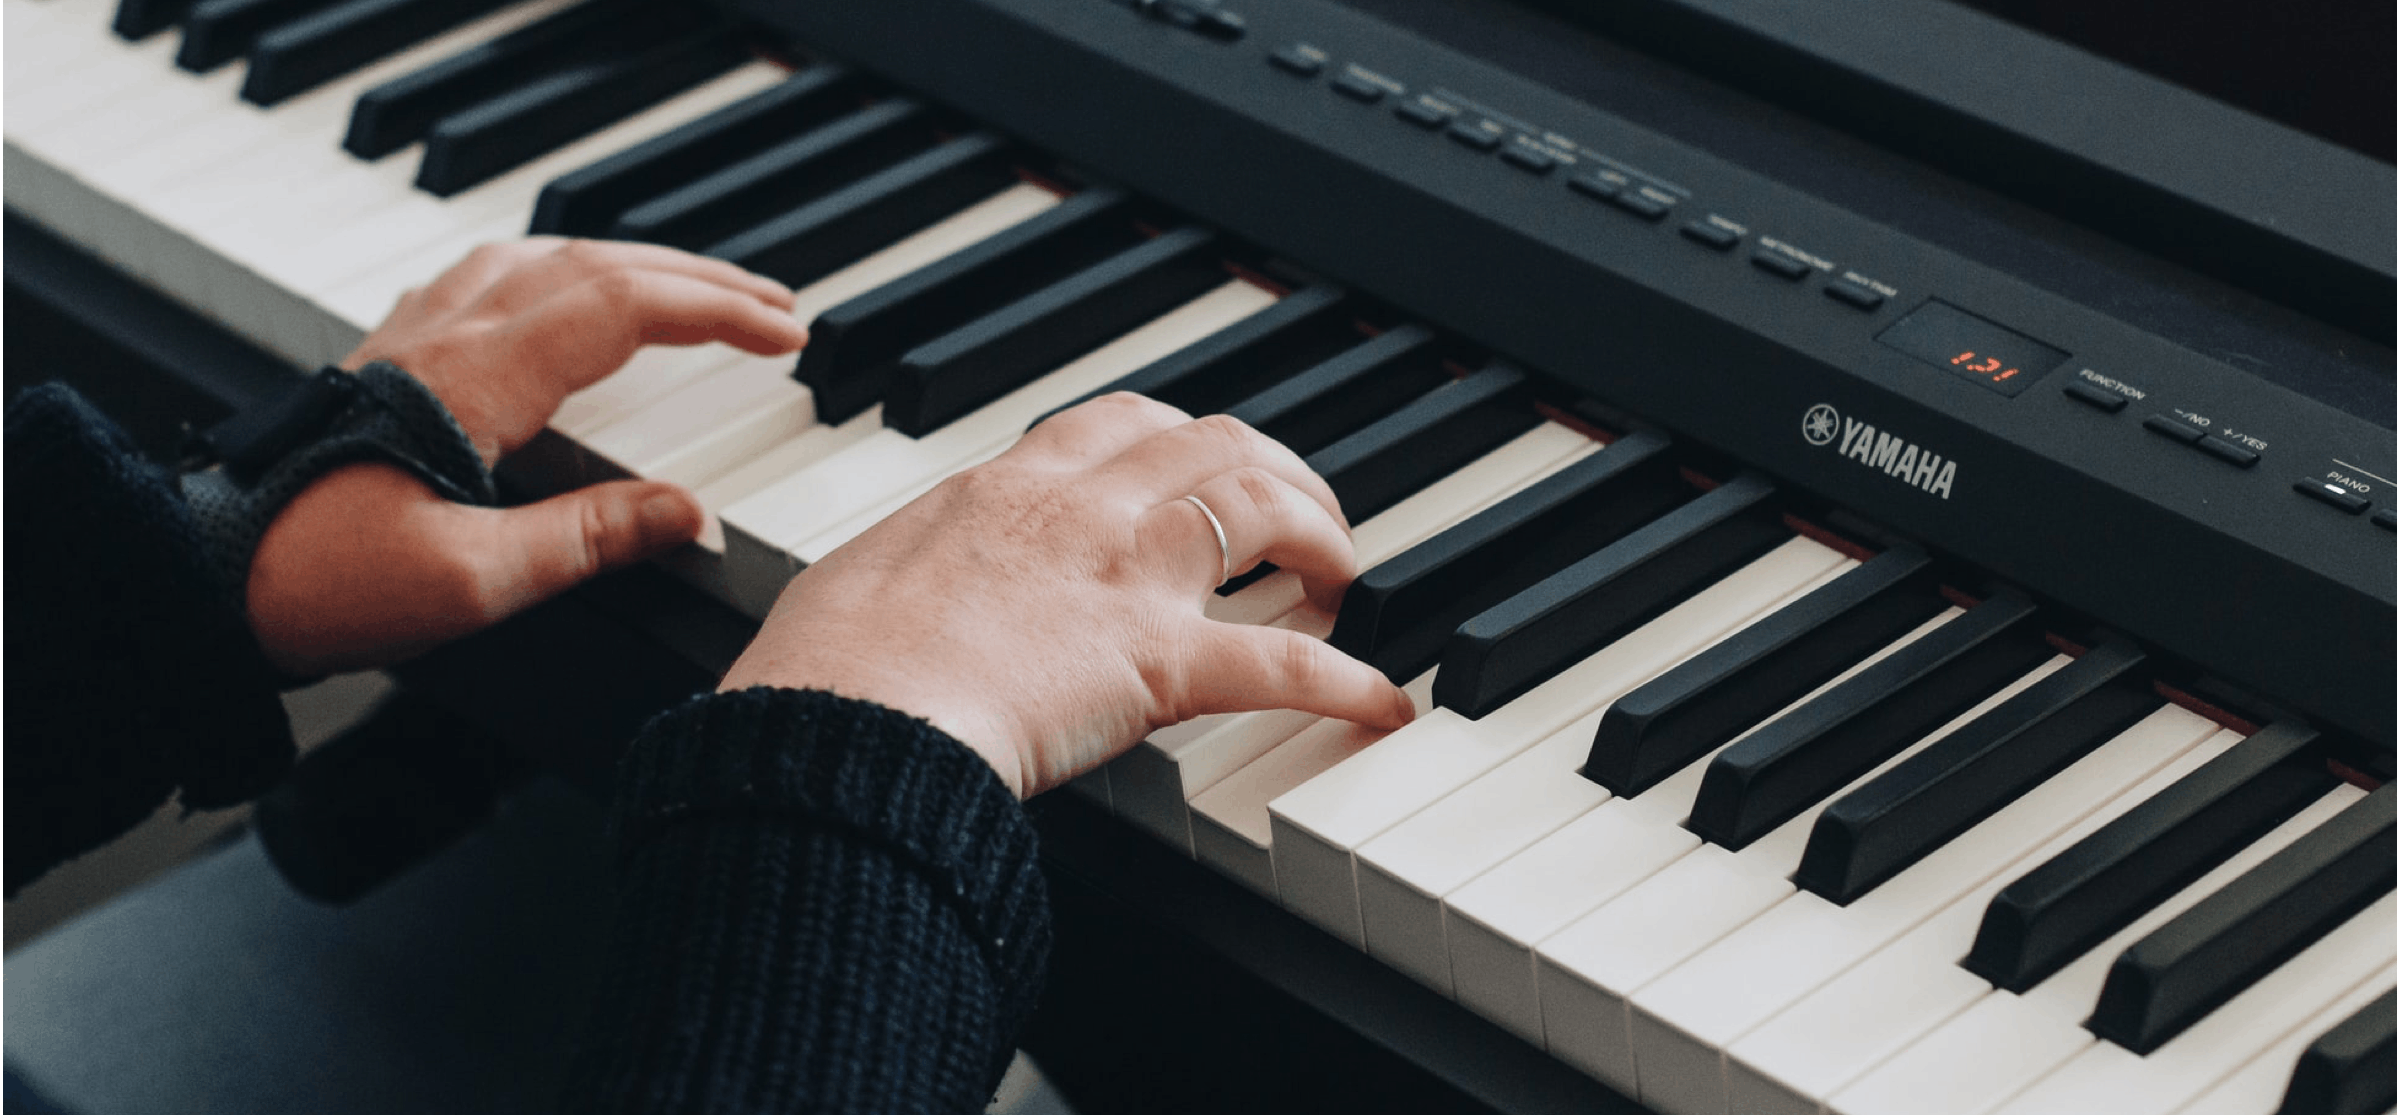 Two hands playing on a Yamaha keyboard